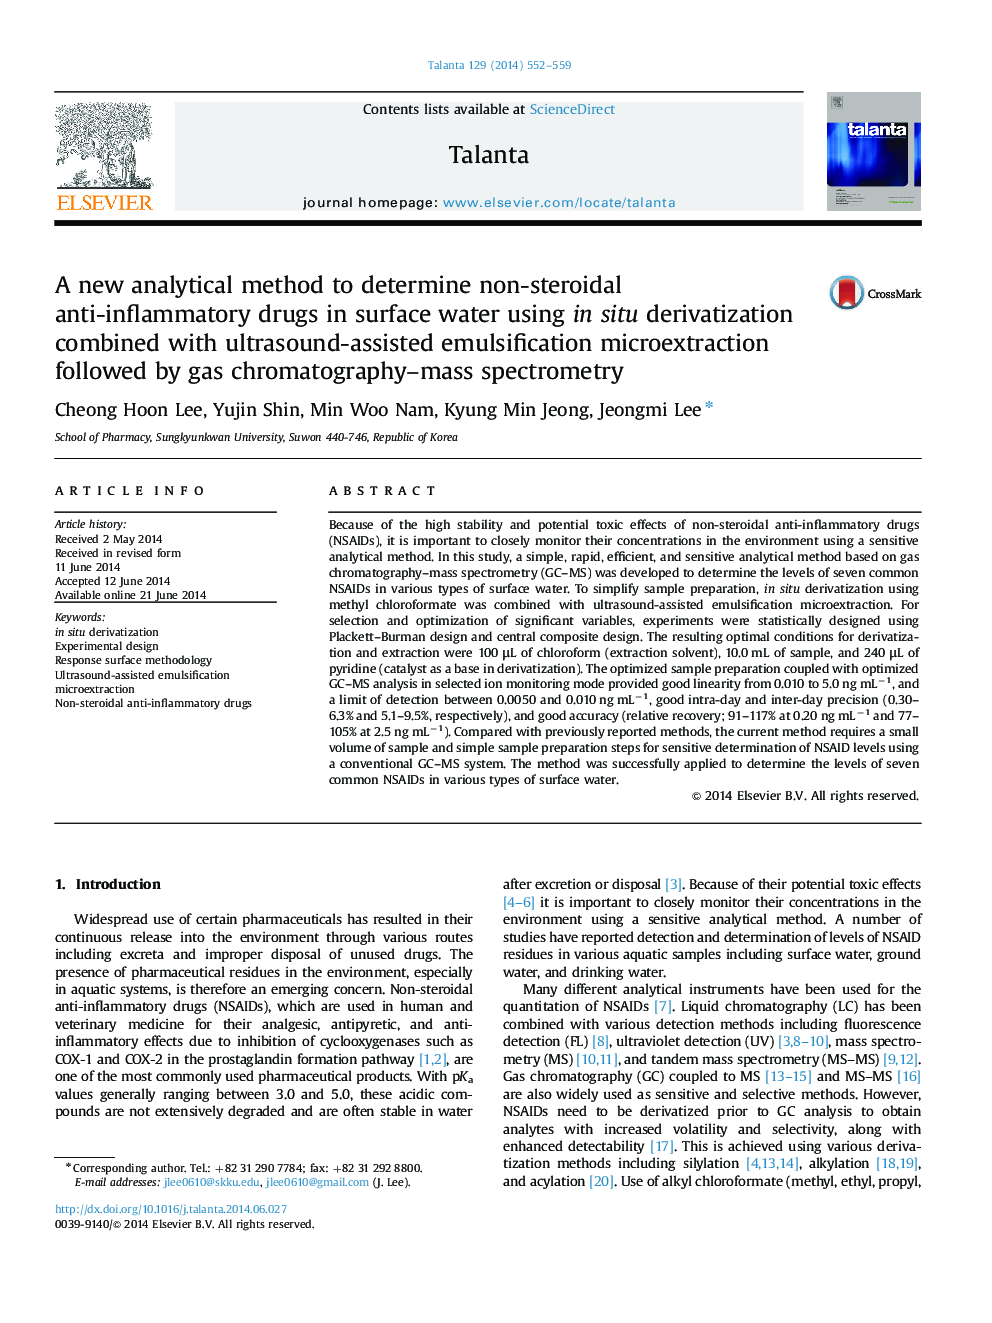 A new analytical method to determine non-steroidal anti-inflammatory drugs in surface water using in situ derivatization combined with ultrasound-assisted emulsification microextraction followed by gas chromatography-mass spectrometry